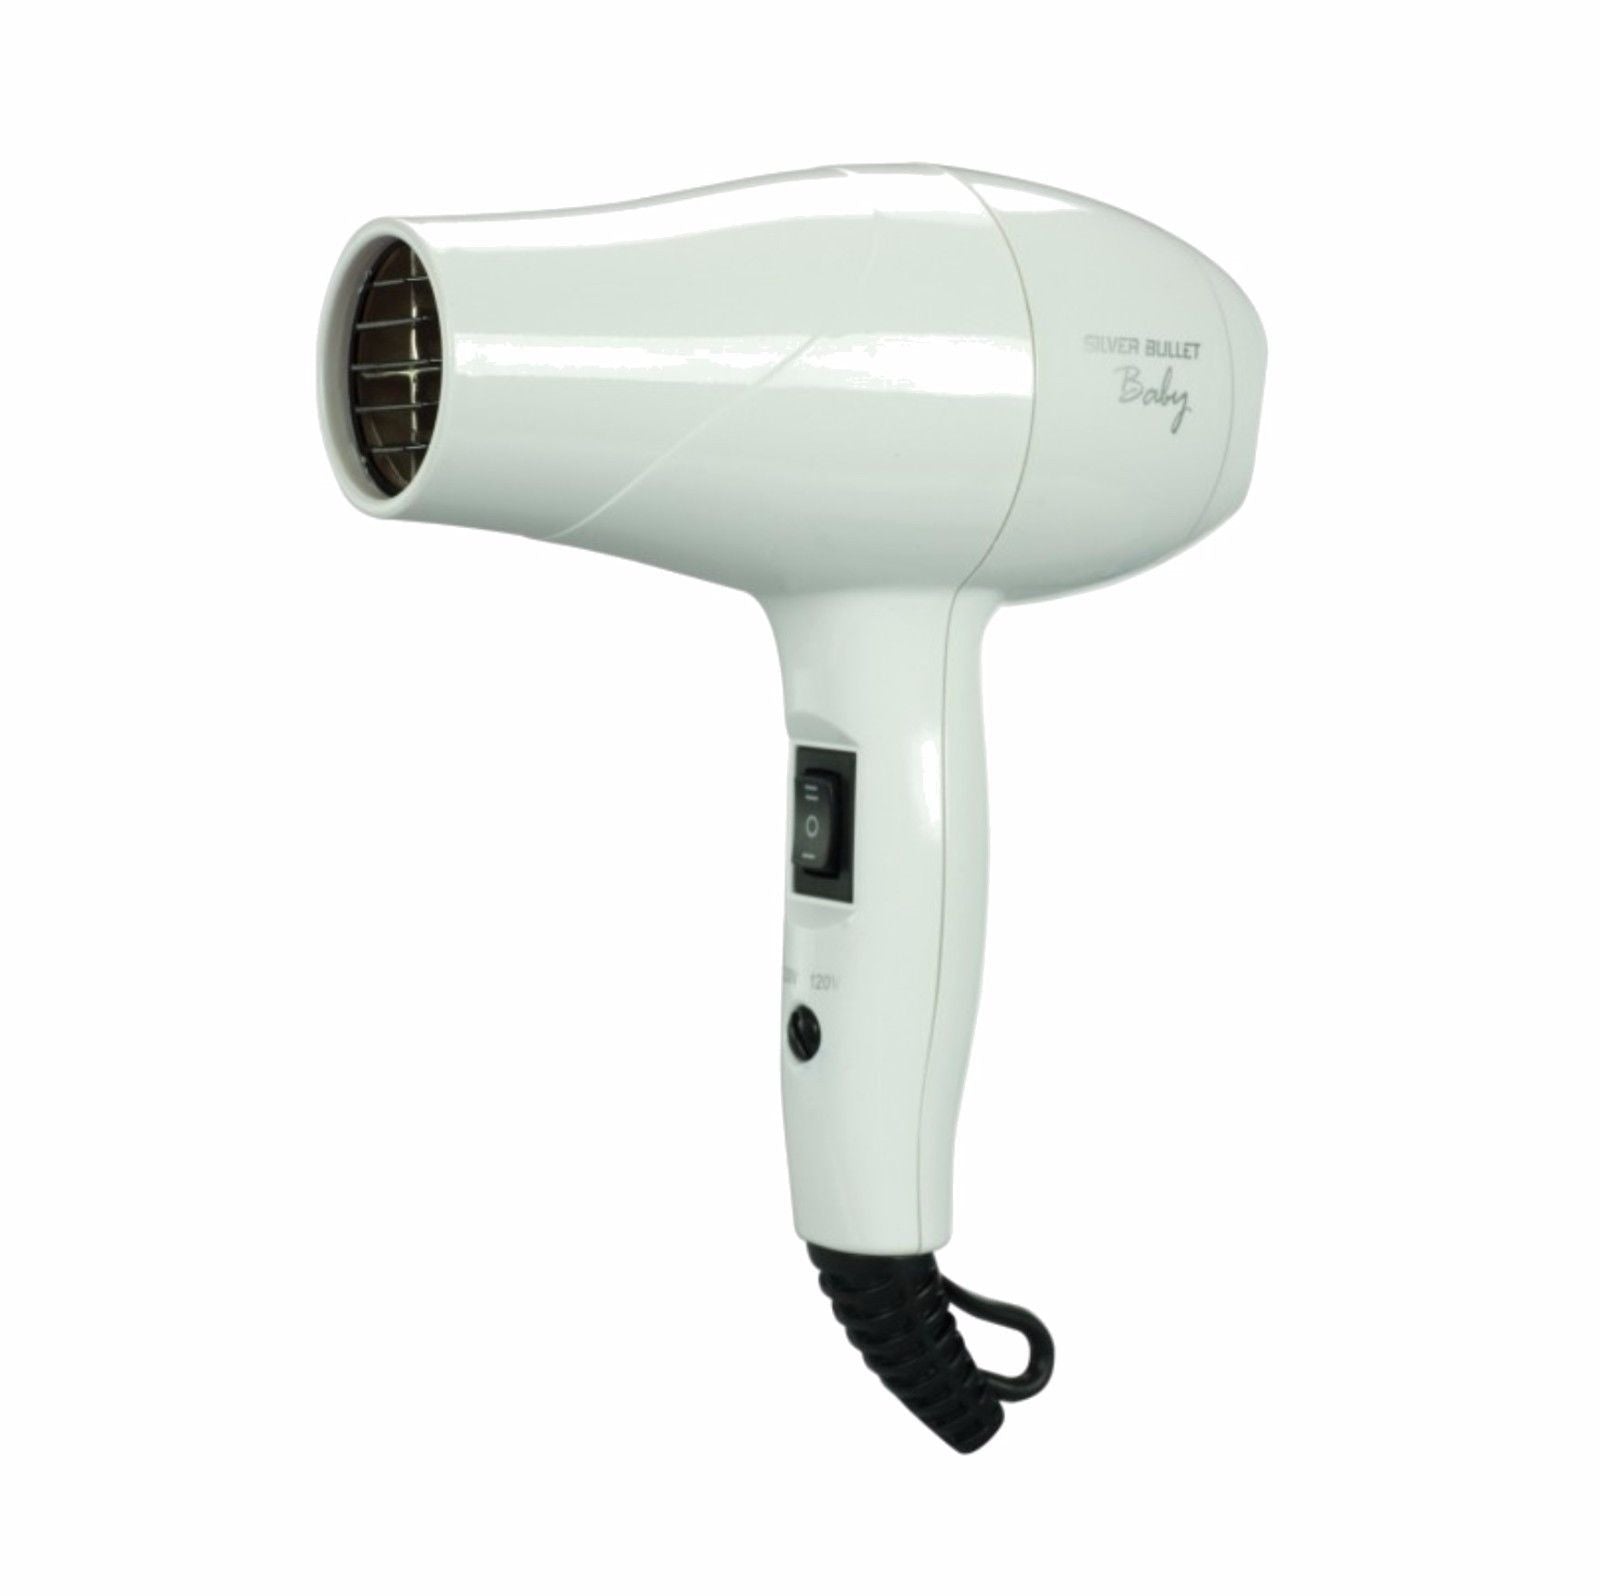 Silver Bullet Baby Travel Hair Dryer - White with Styling Nozzle & Diffuser NEW - On Line Hair Depot